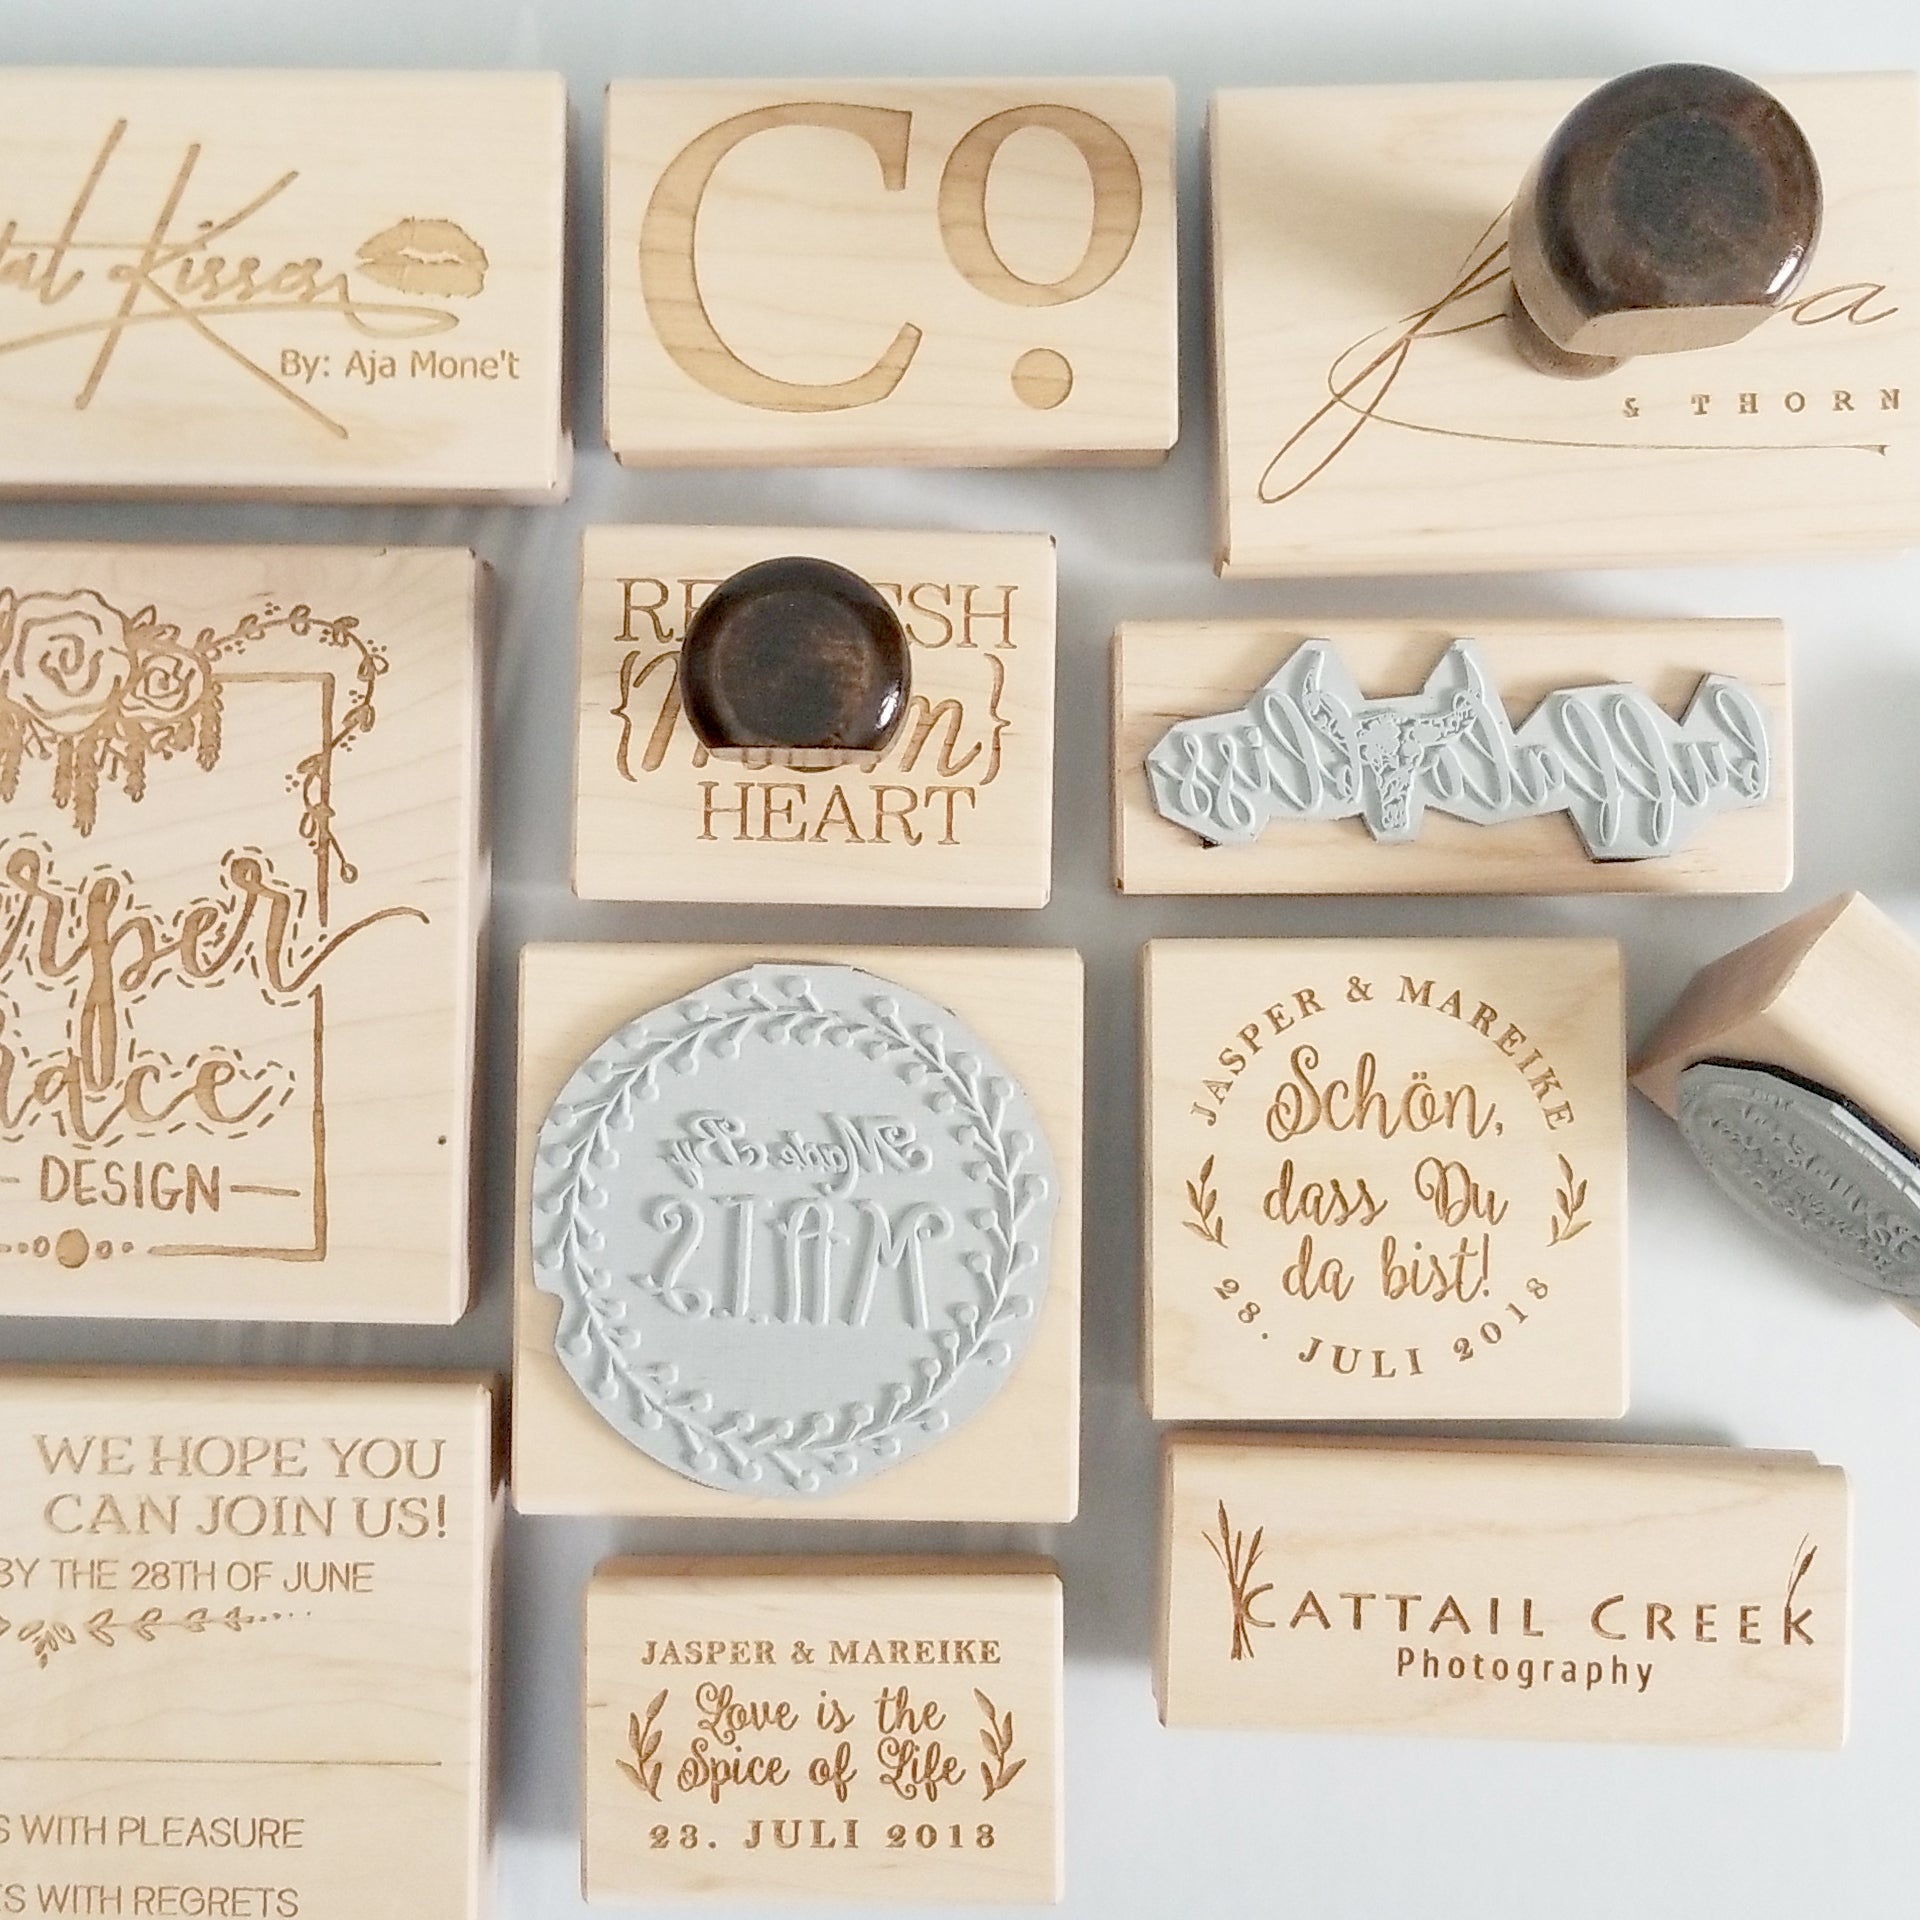 Rubber Stamps, We design for you